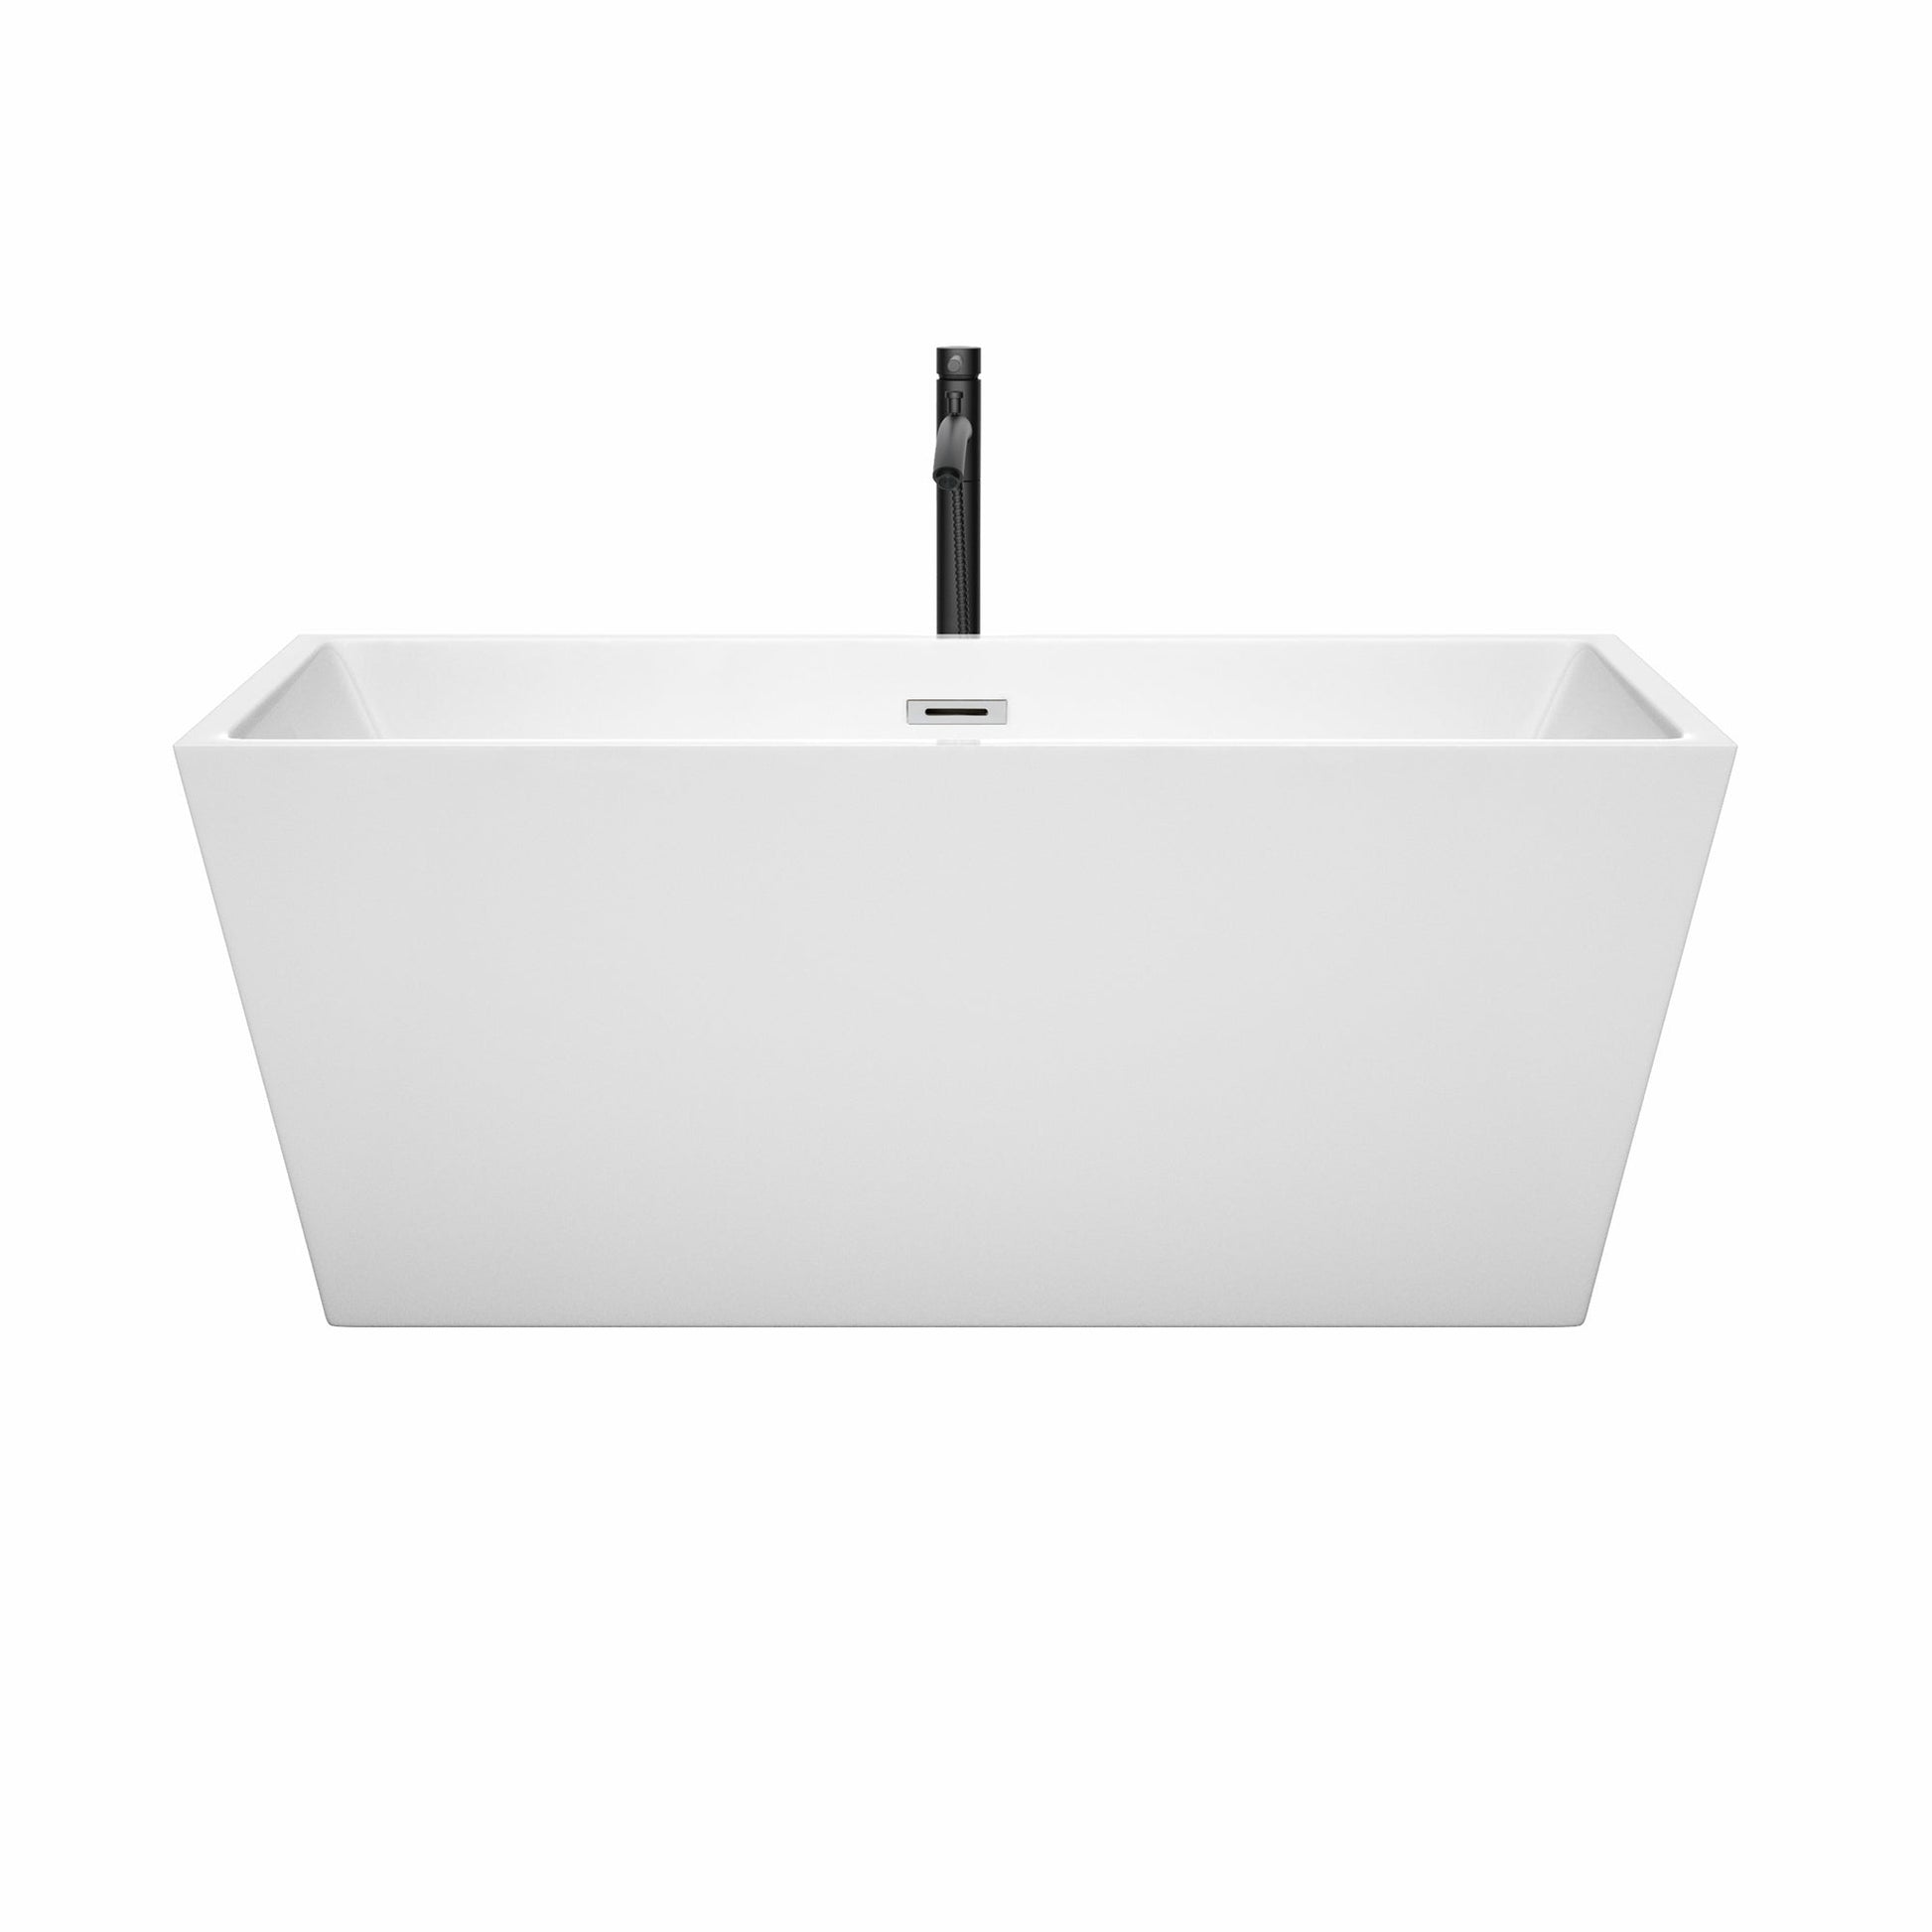 Wyndham Collection Sara 59" Freestanding Bathtub in White With Polished Chrome Trim and Floor Mounted Faucet in Matte Black